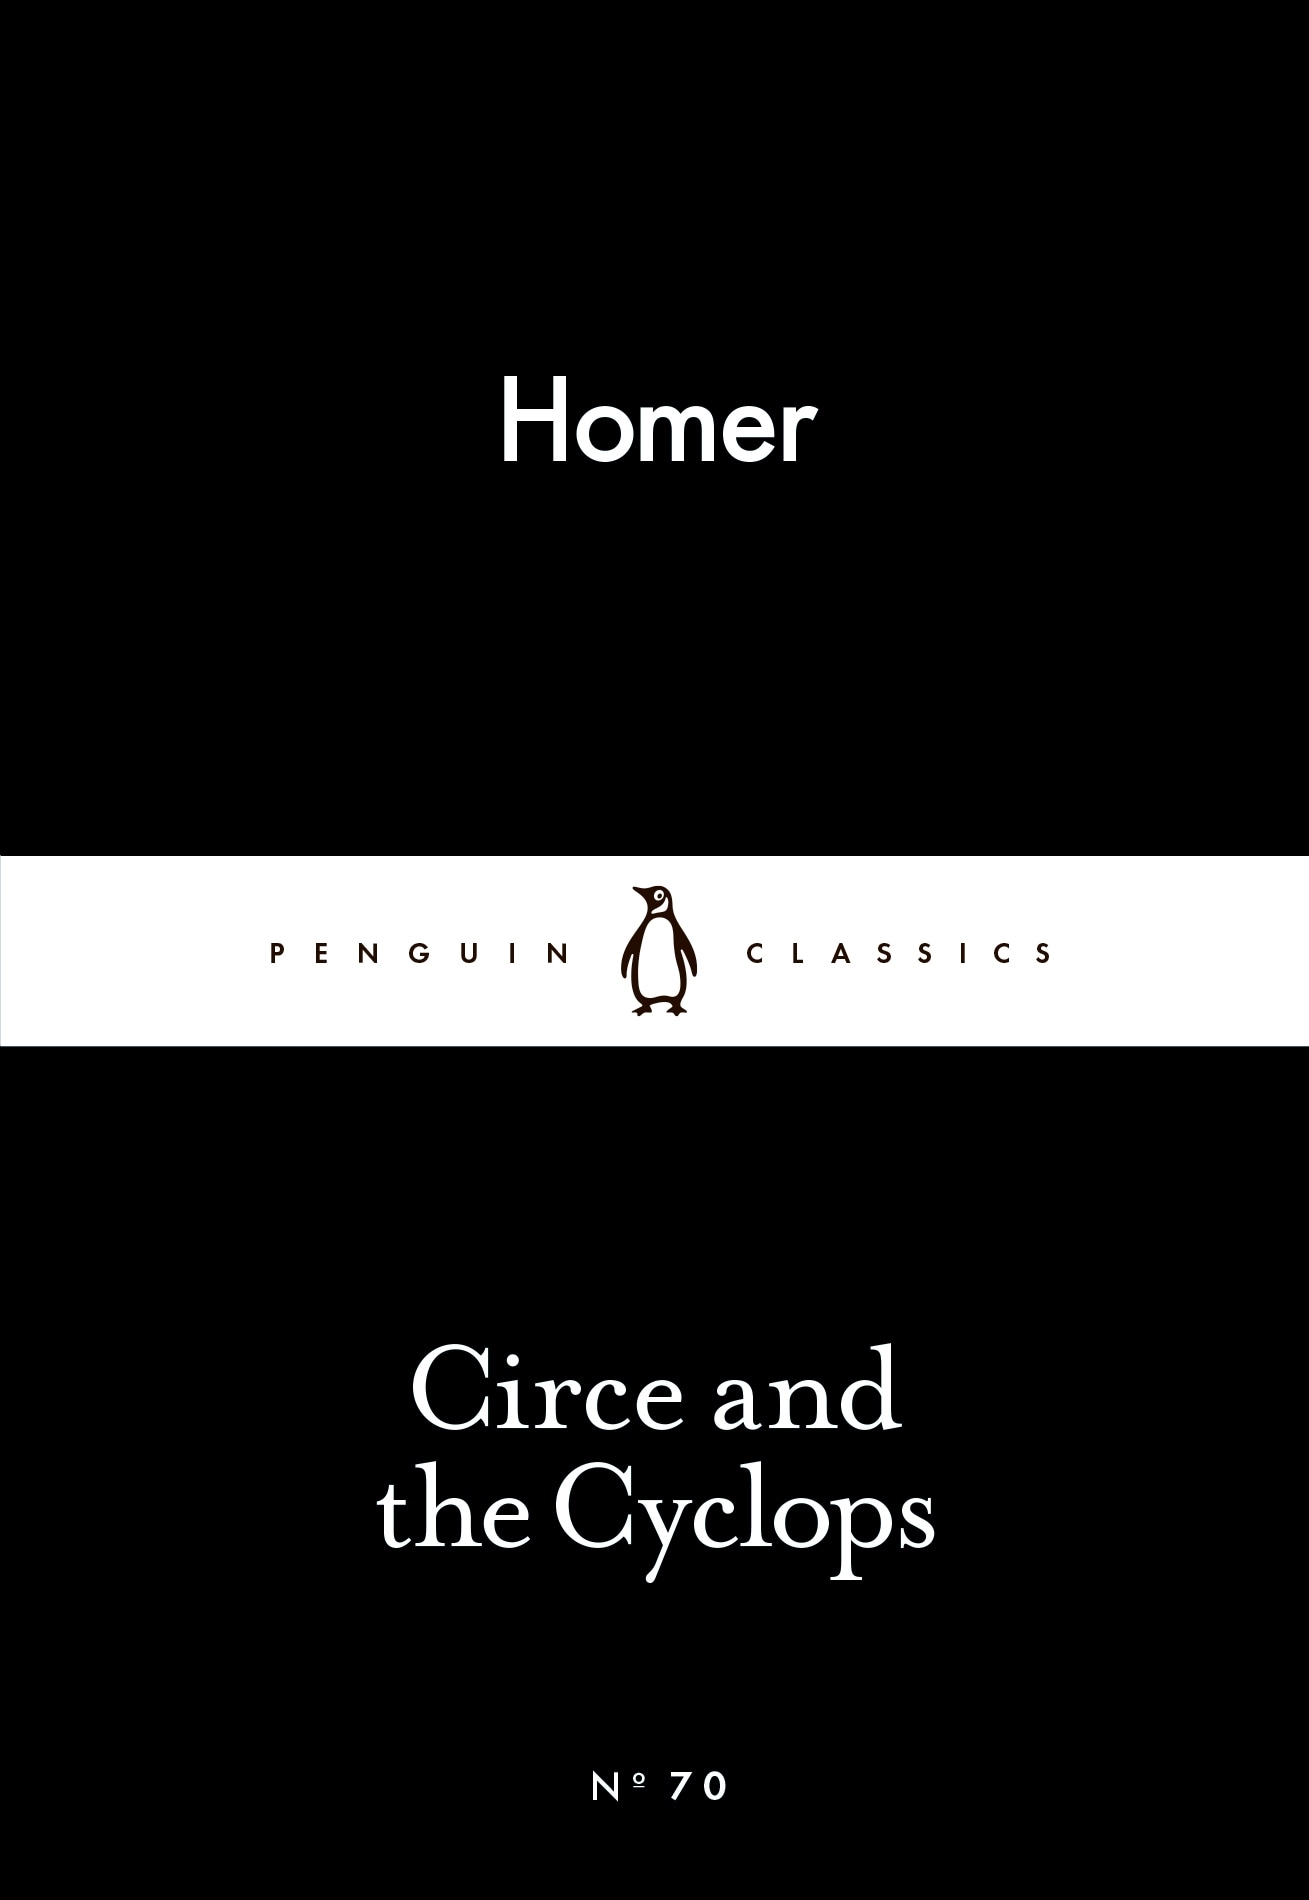 Book “Circe and the Cyclops” by Homer — February 26, 2015